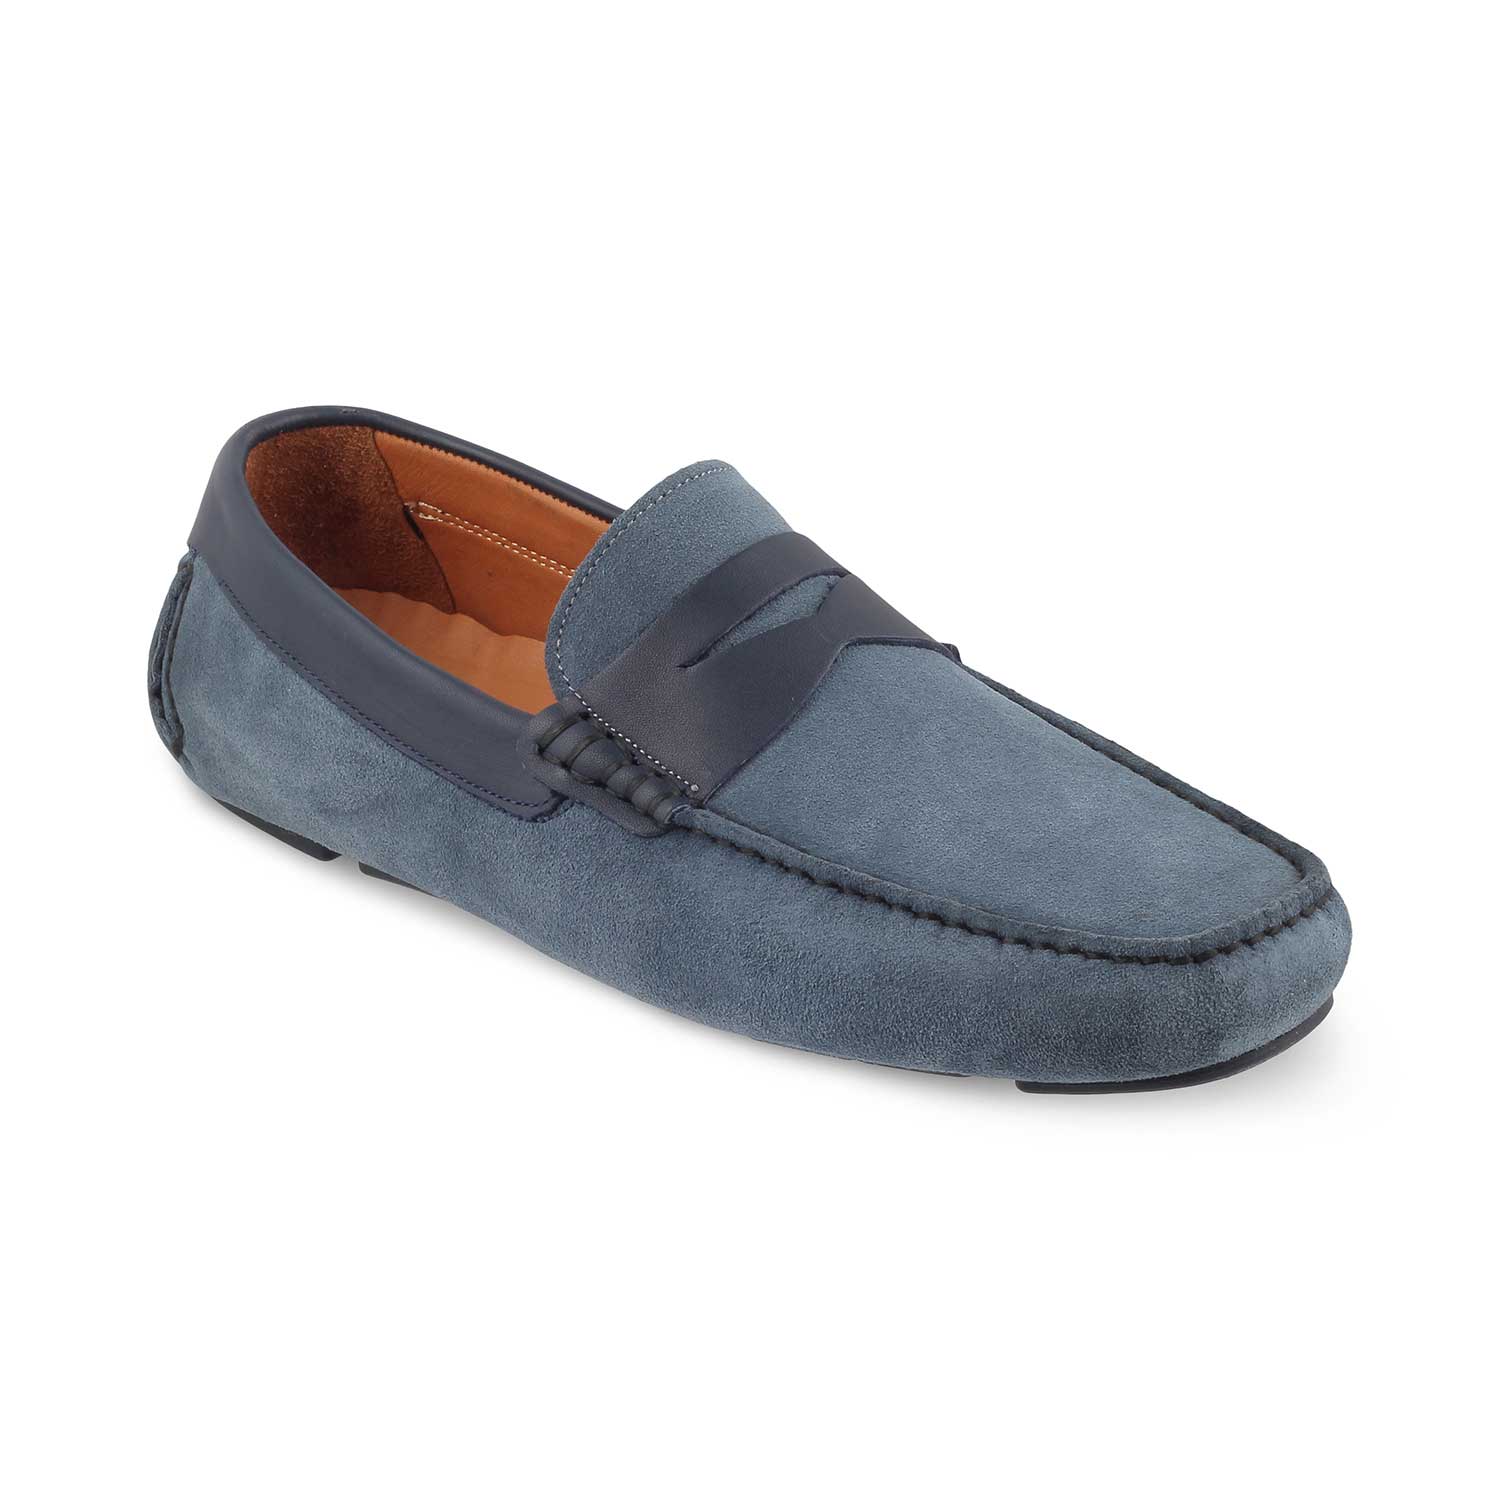 Tresmode-The Tirbutin Blue Men's Leather Driving Loafers Tresmode-Tresmode